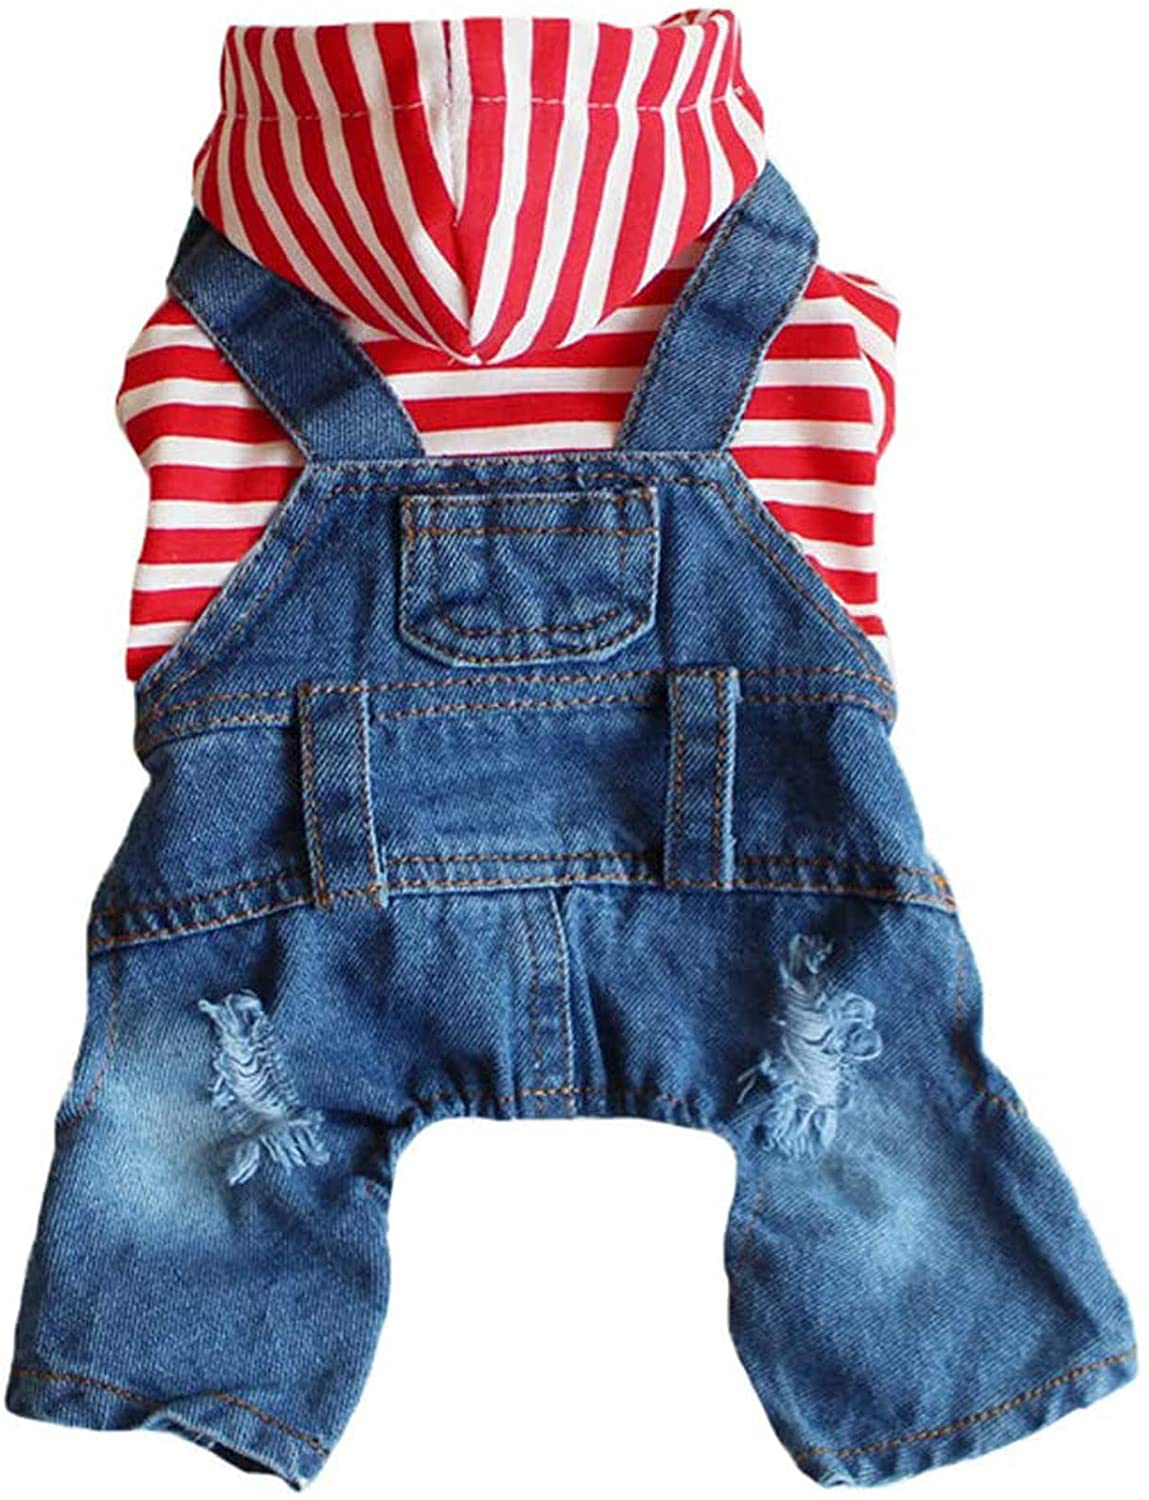 DOGGYZSTYLE Pet Dog Cat Hoodies Clothes Striped Pajamas Denim Outfits Blue Jeans Jumpsuits One-Piece Jacket Costumes Apparel Hooded Coats for Small Puppy Medium Dogs Animals & Pet Supplies > Pet Supplies > Cat Supplies > Cat Apparel DOGGYZSTYLE Red Small (Pack of 1) 